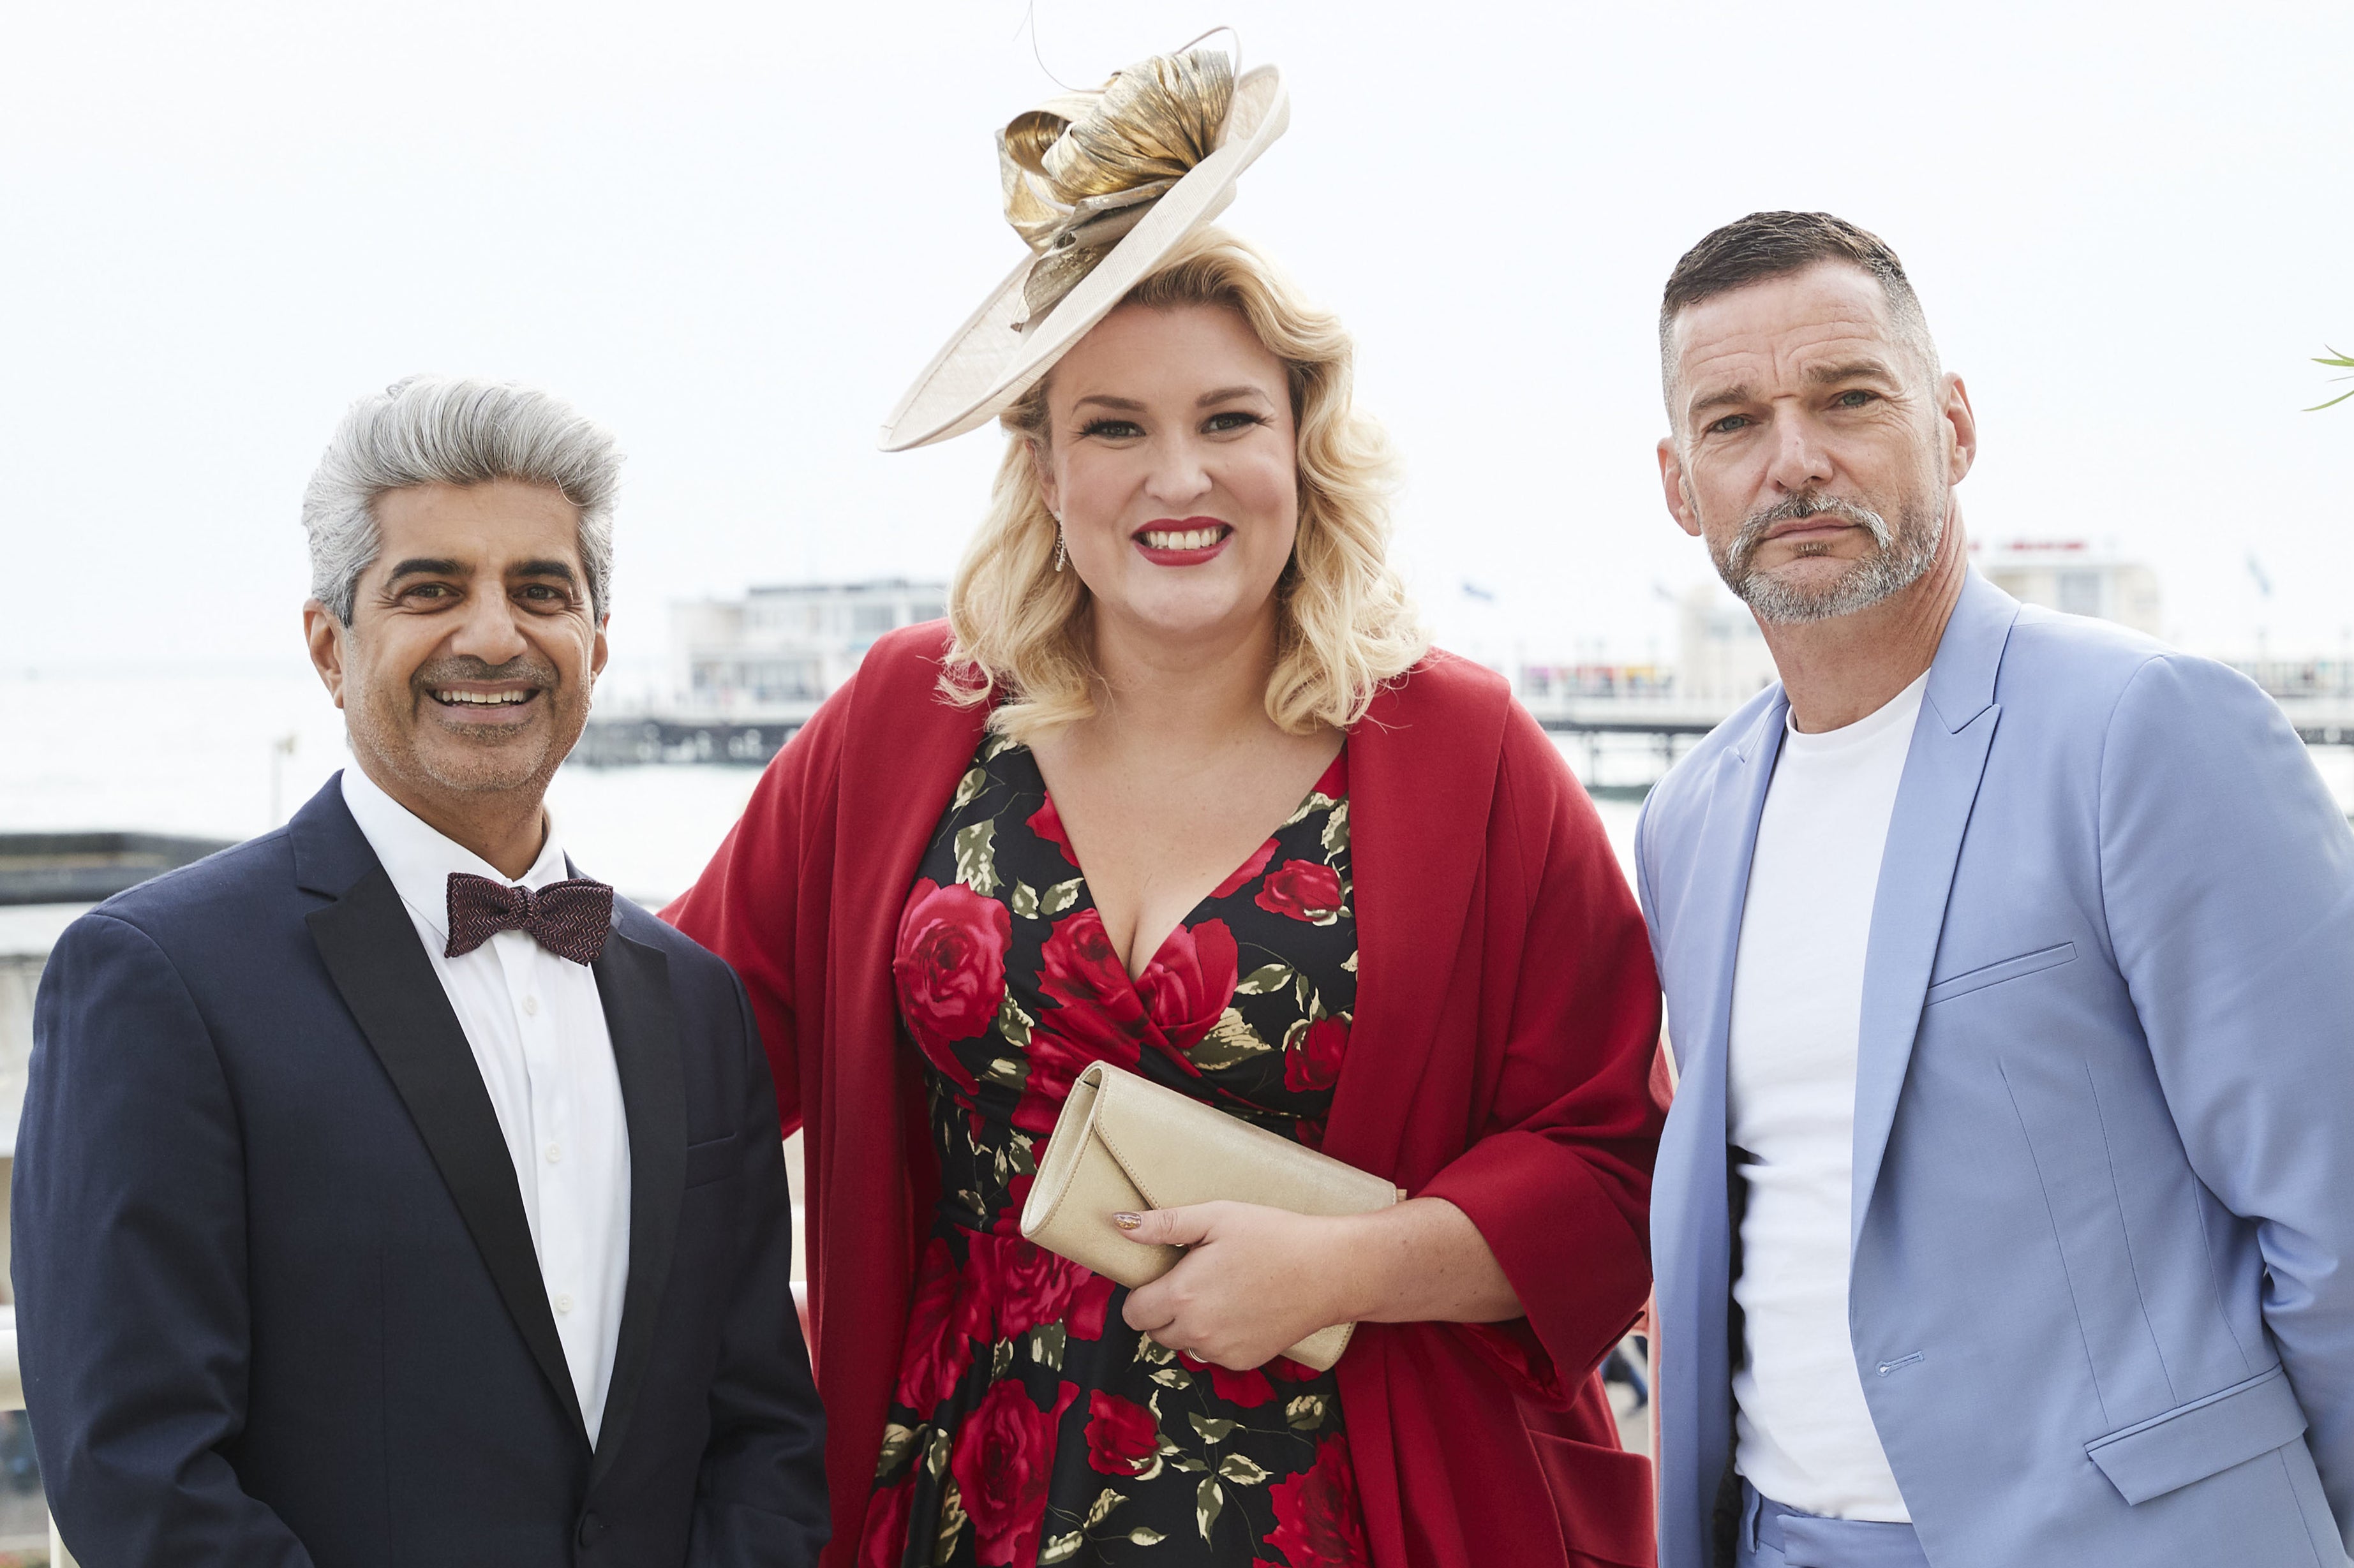 Let’s call it off: Raj Somaiya, Sara Davies and Fred Sirieix, who judge the BBC’s ‘Ultimate Wedding Planner’